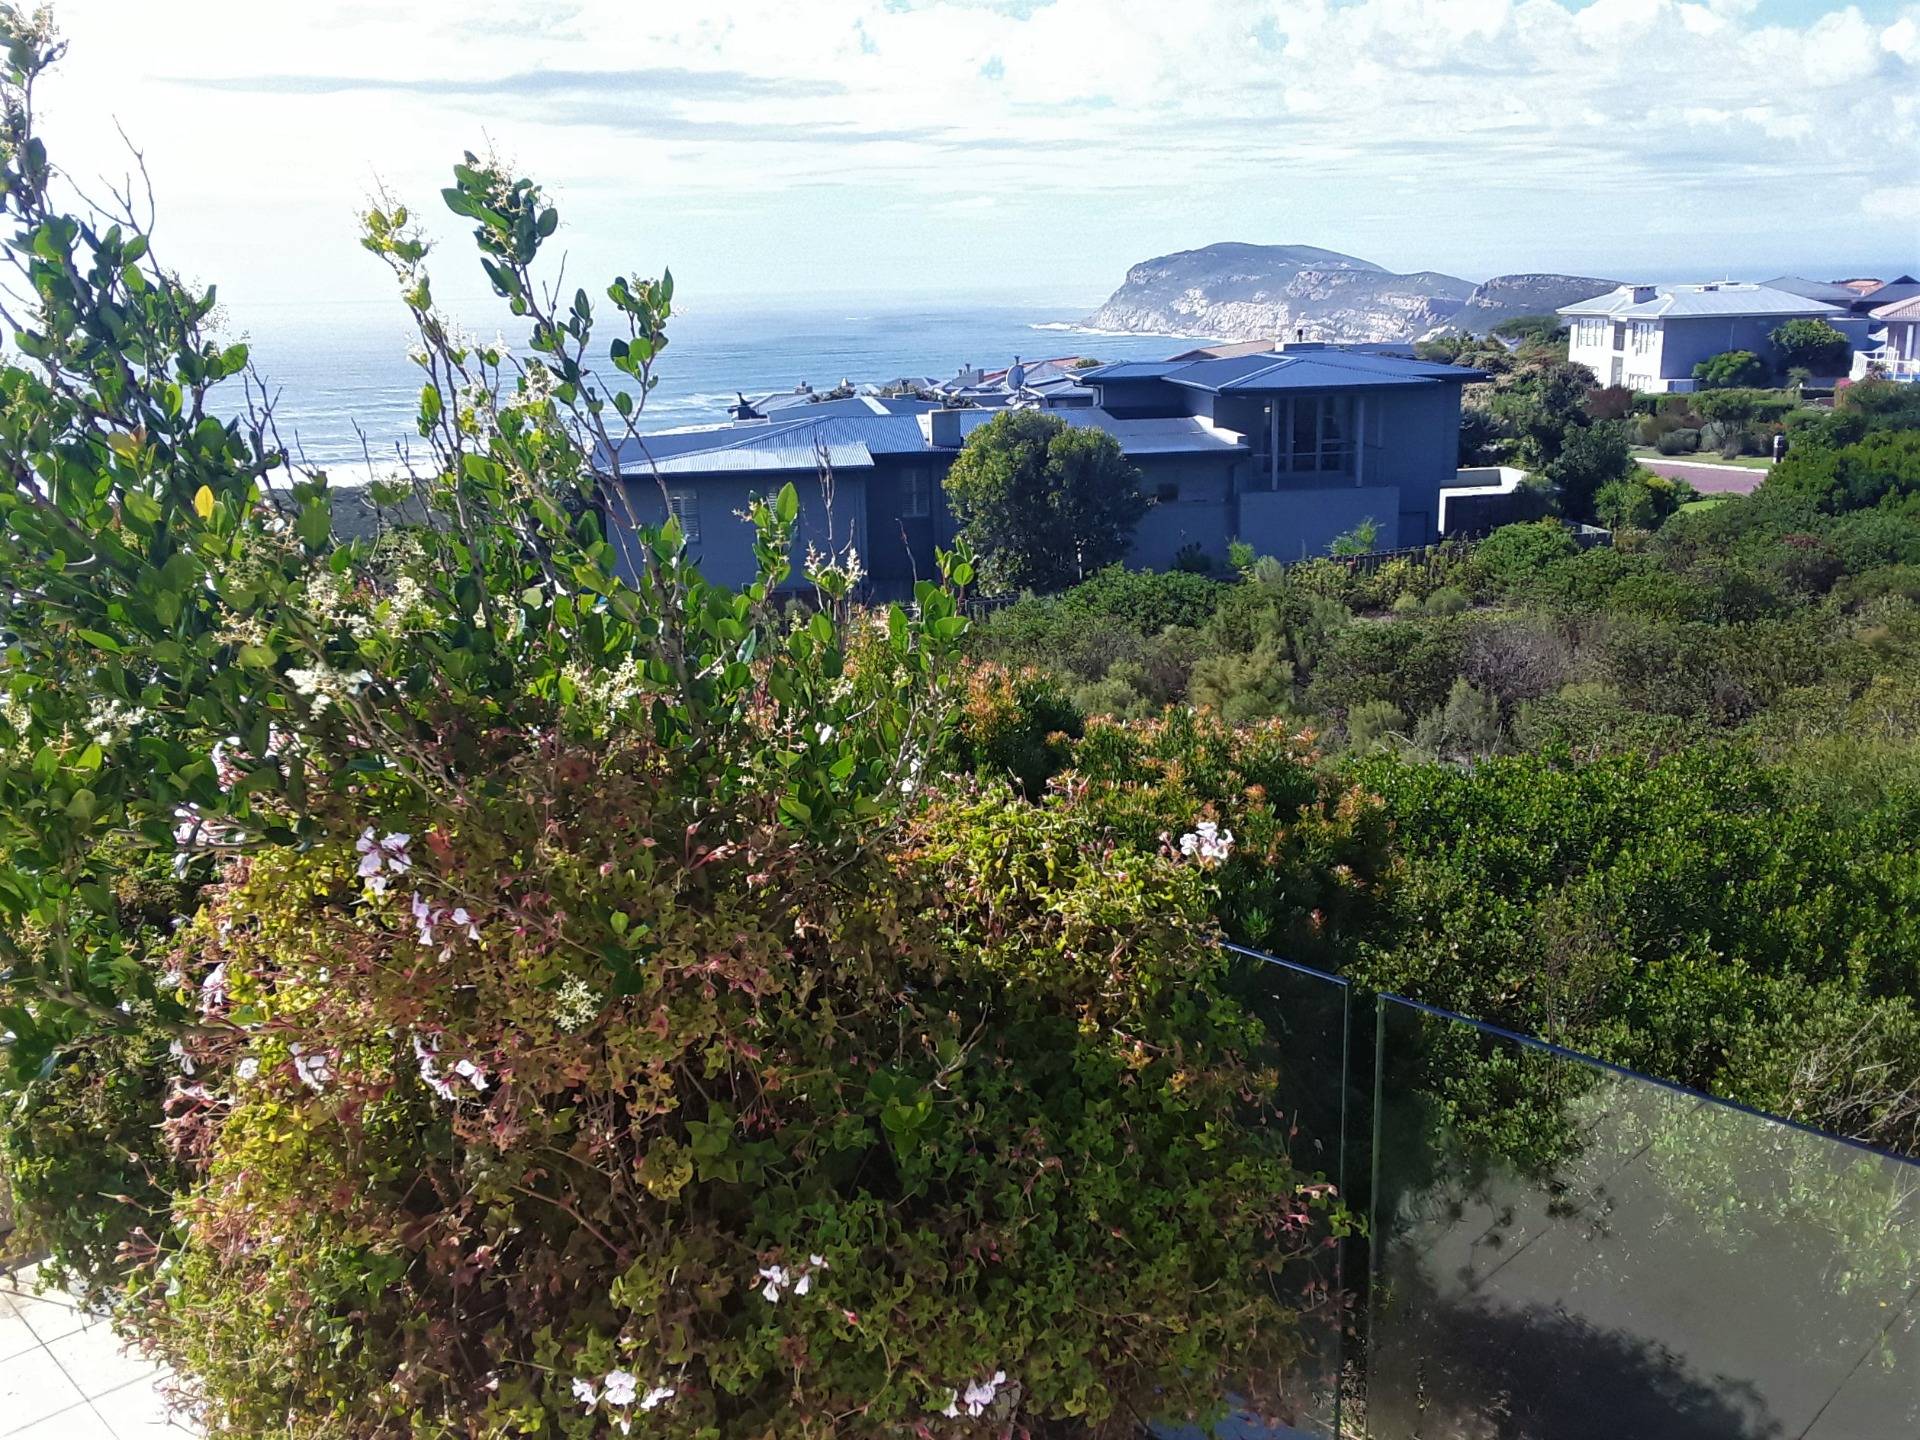 View of Robberg peninsula in the distance from the same house, within walking distance of the beach